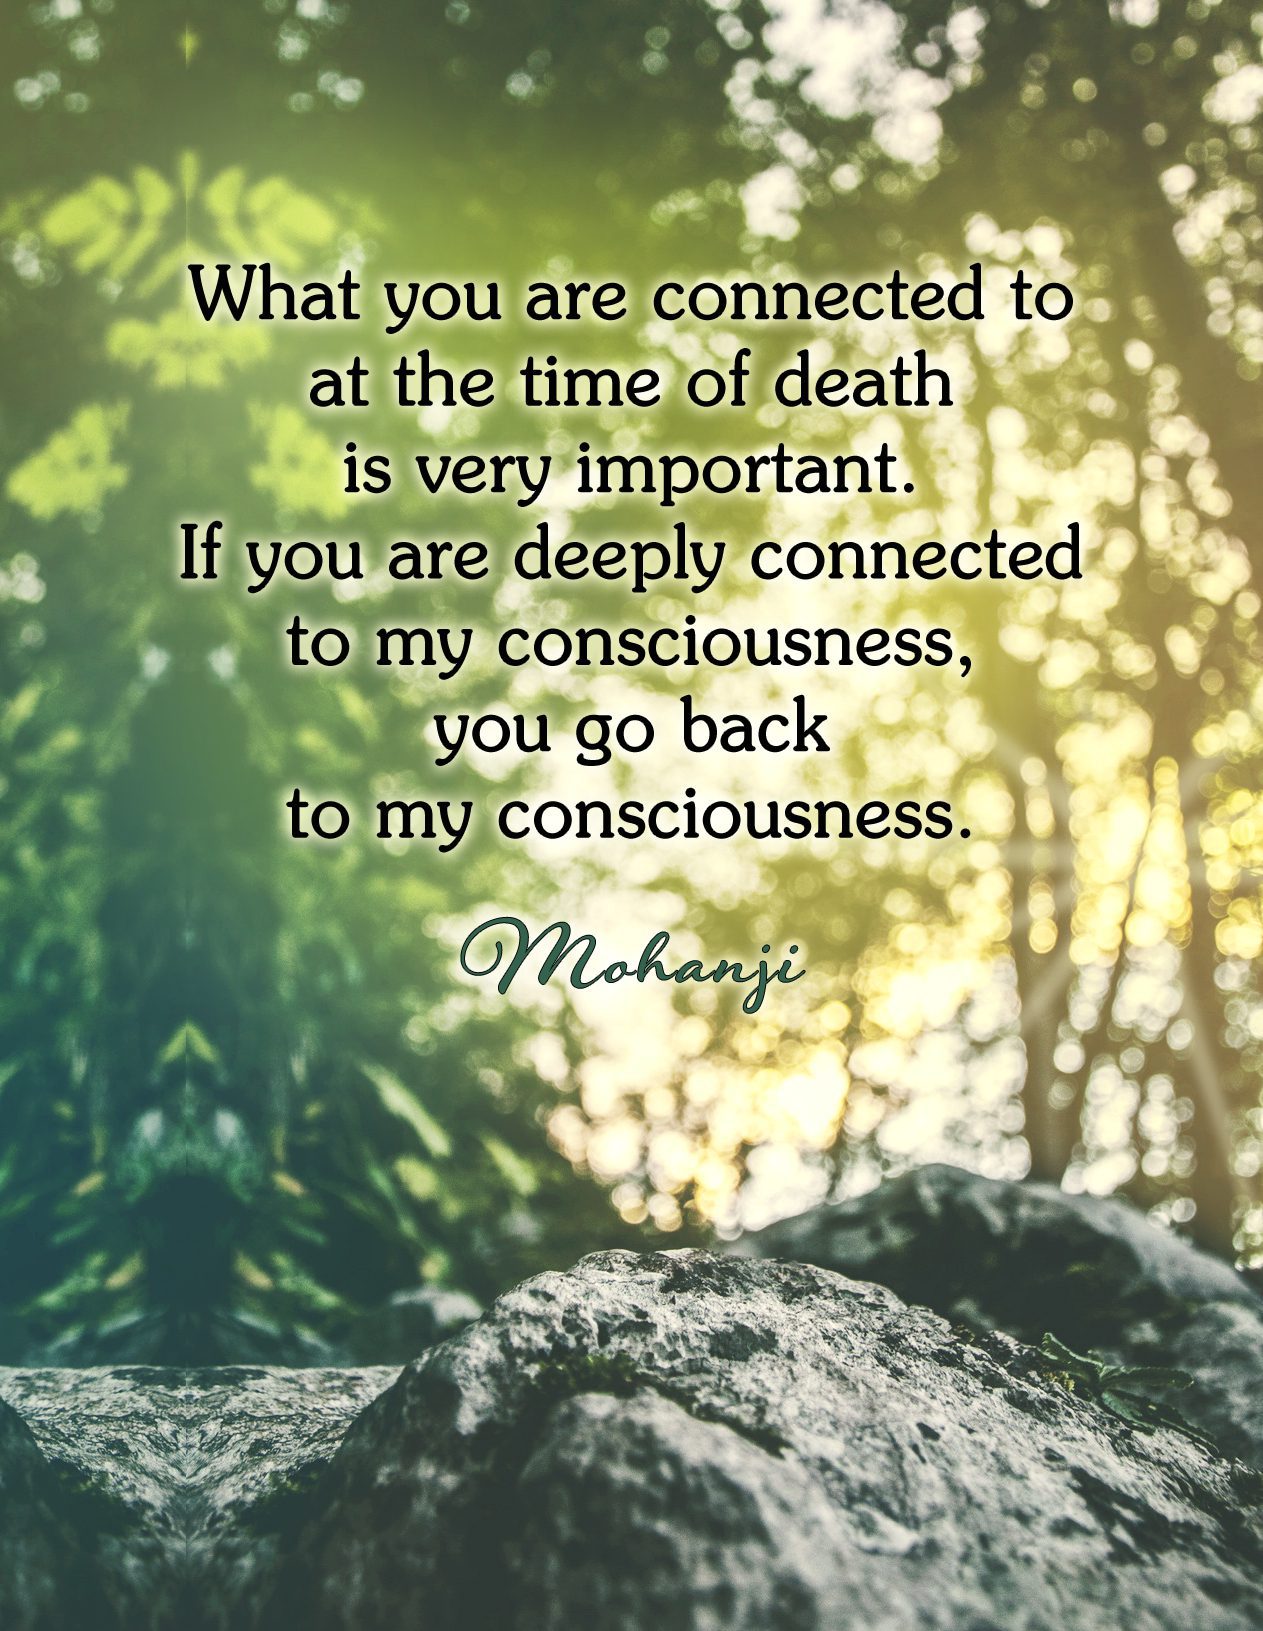 Mohanji quote - What you are connected to at the time of death